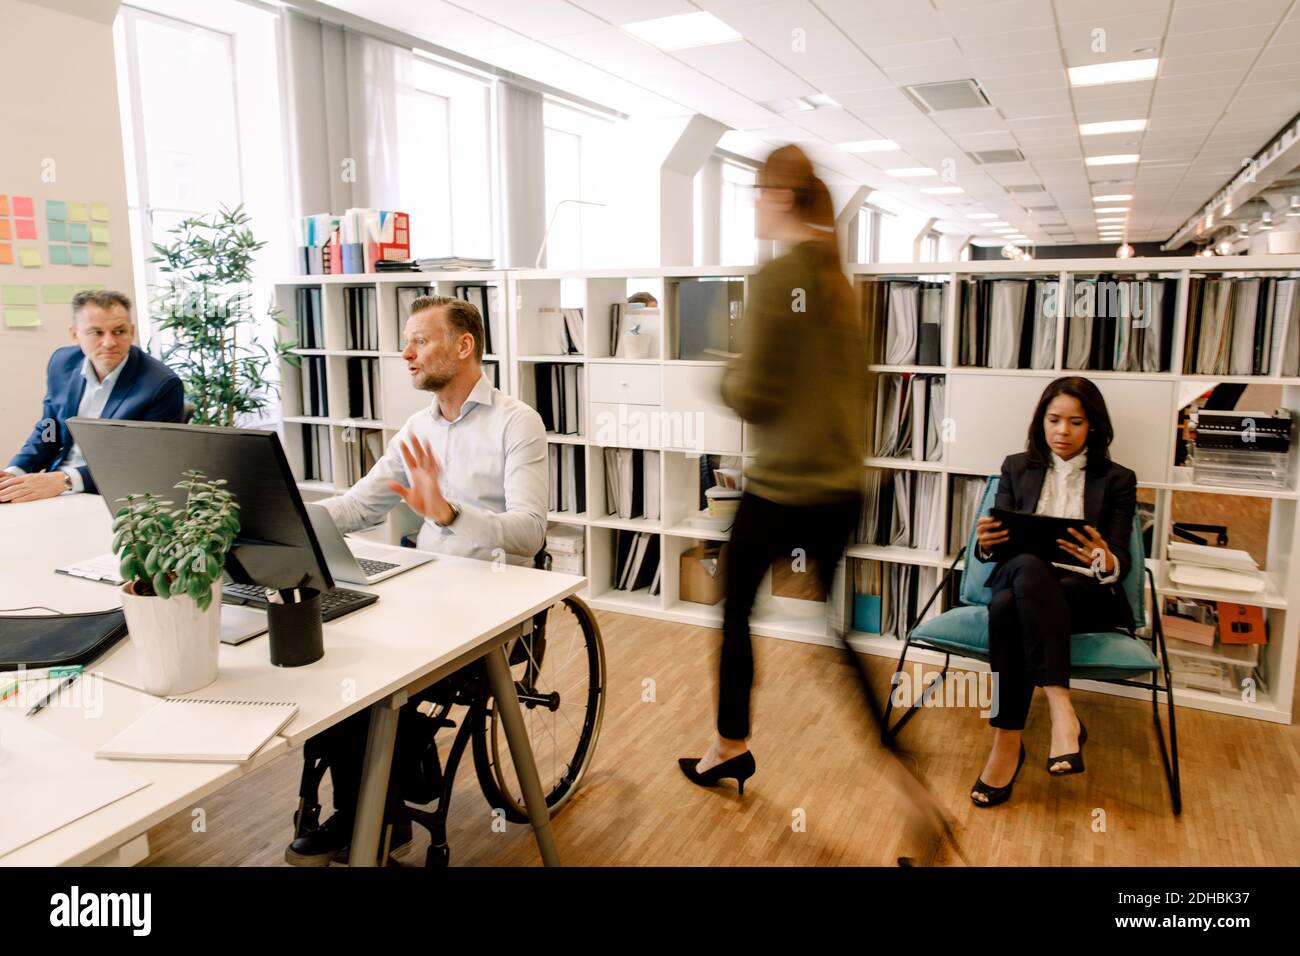 Sales professionals working in office Stock Photo